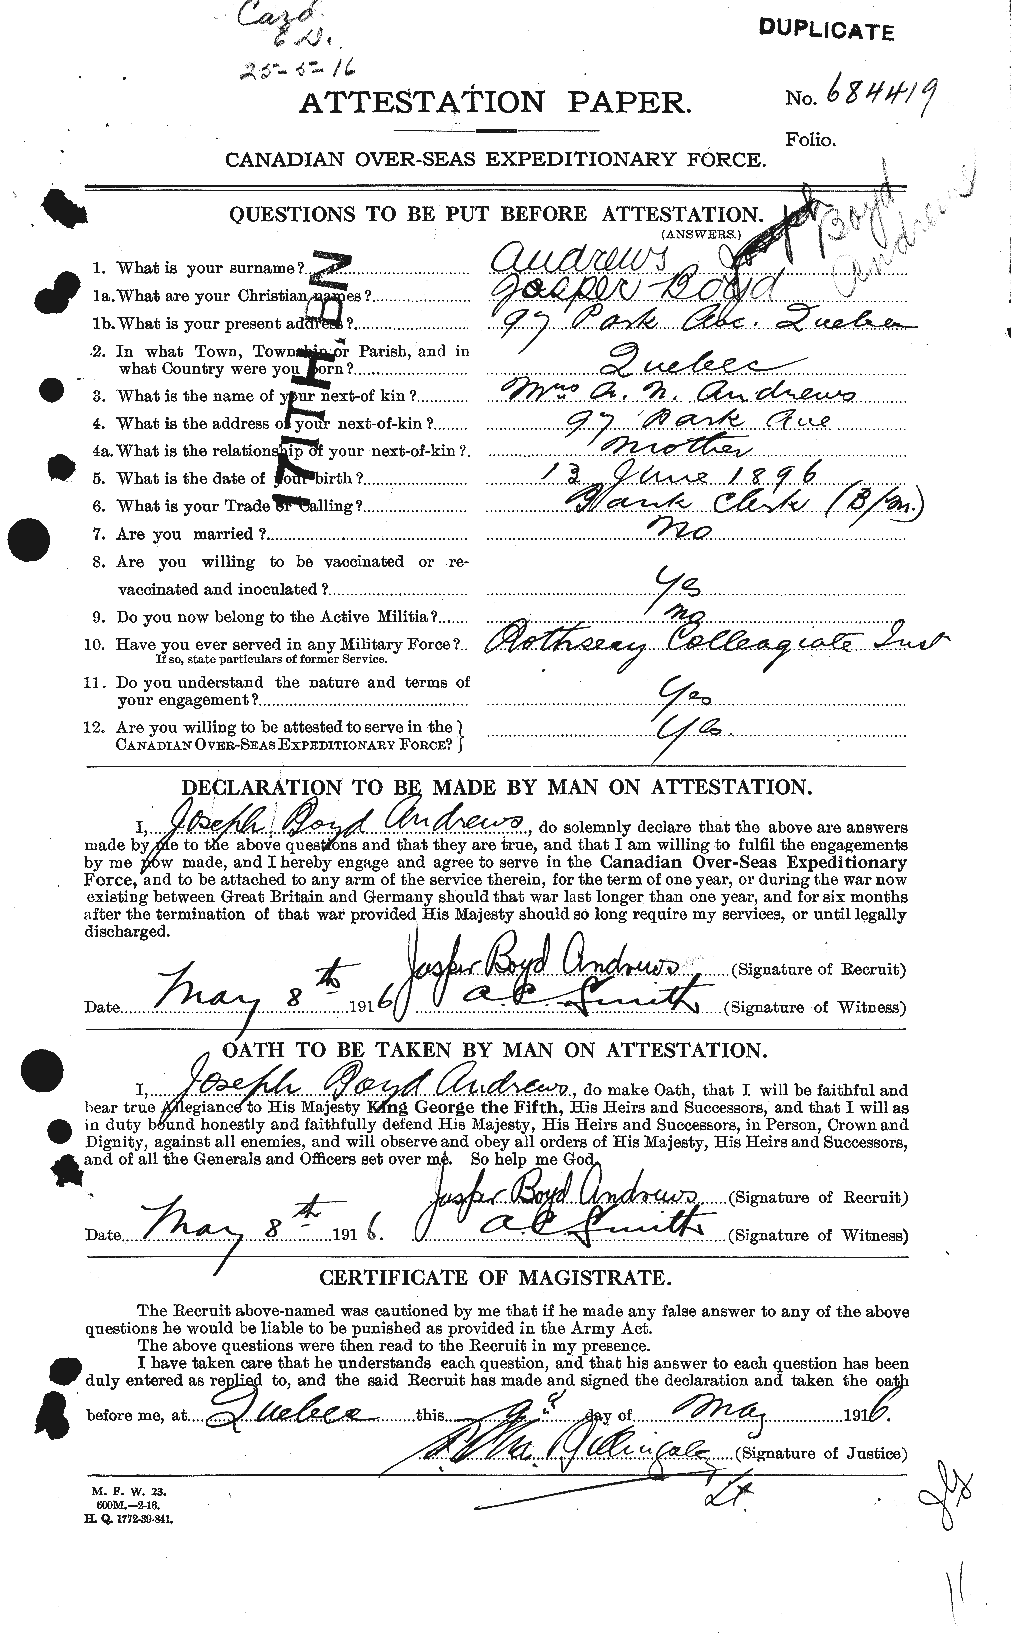 Personnel Records of the First World War - CEF 210224a